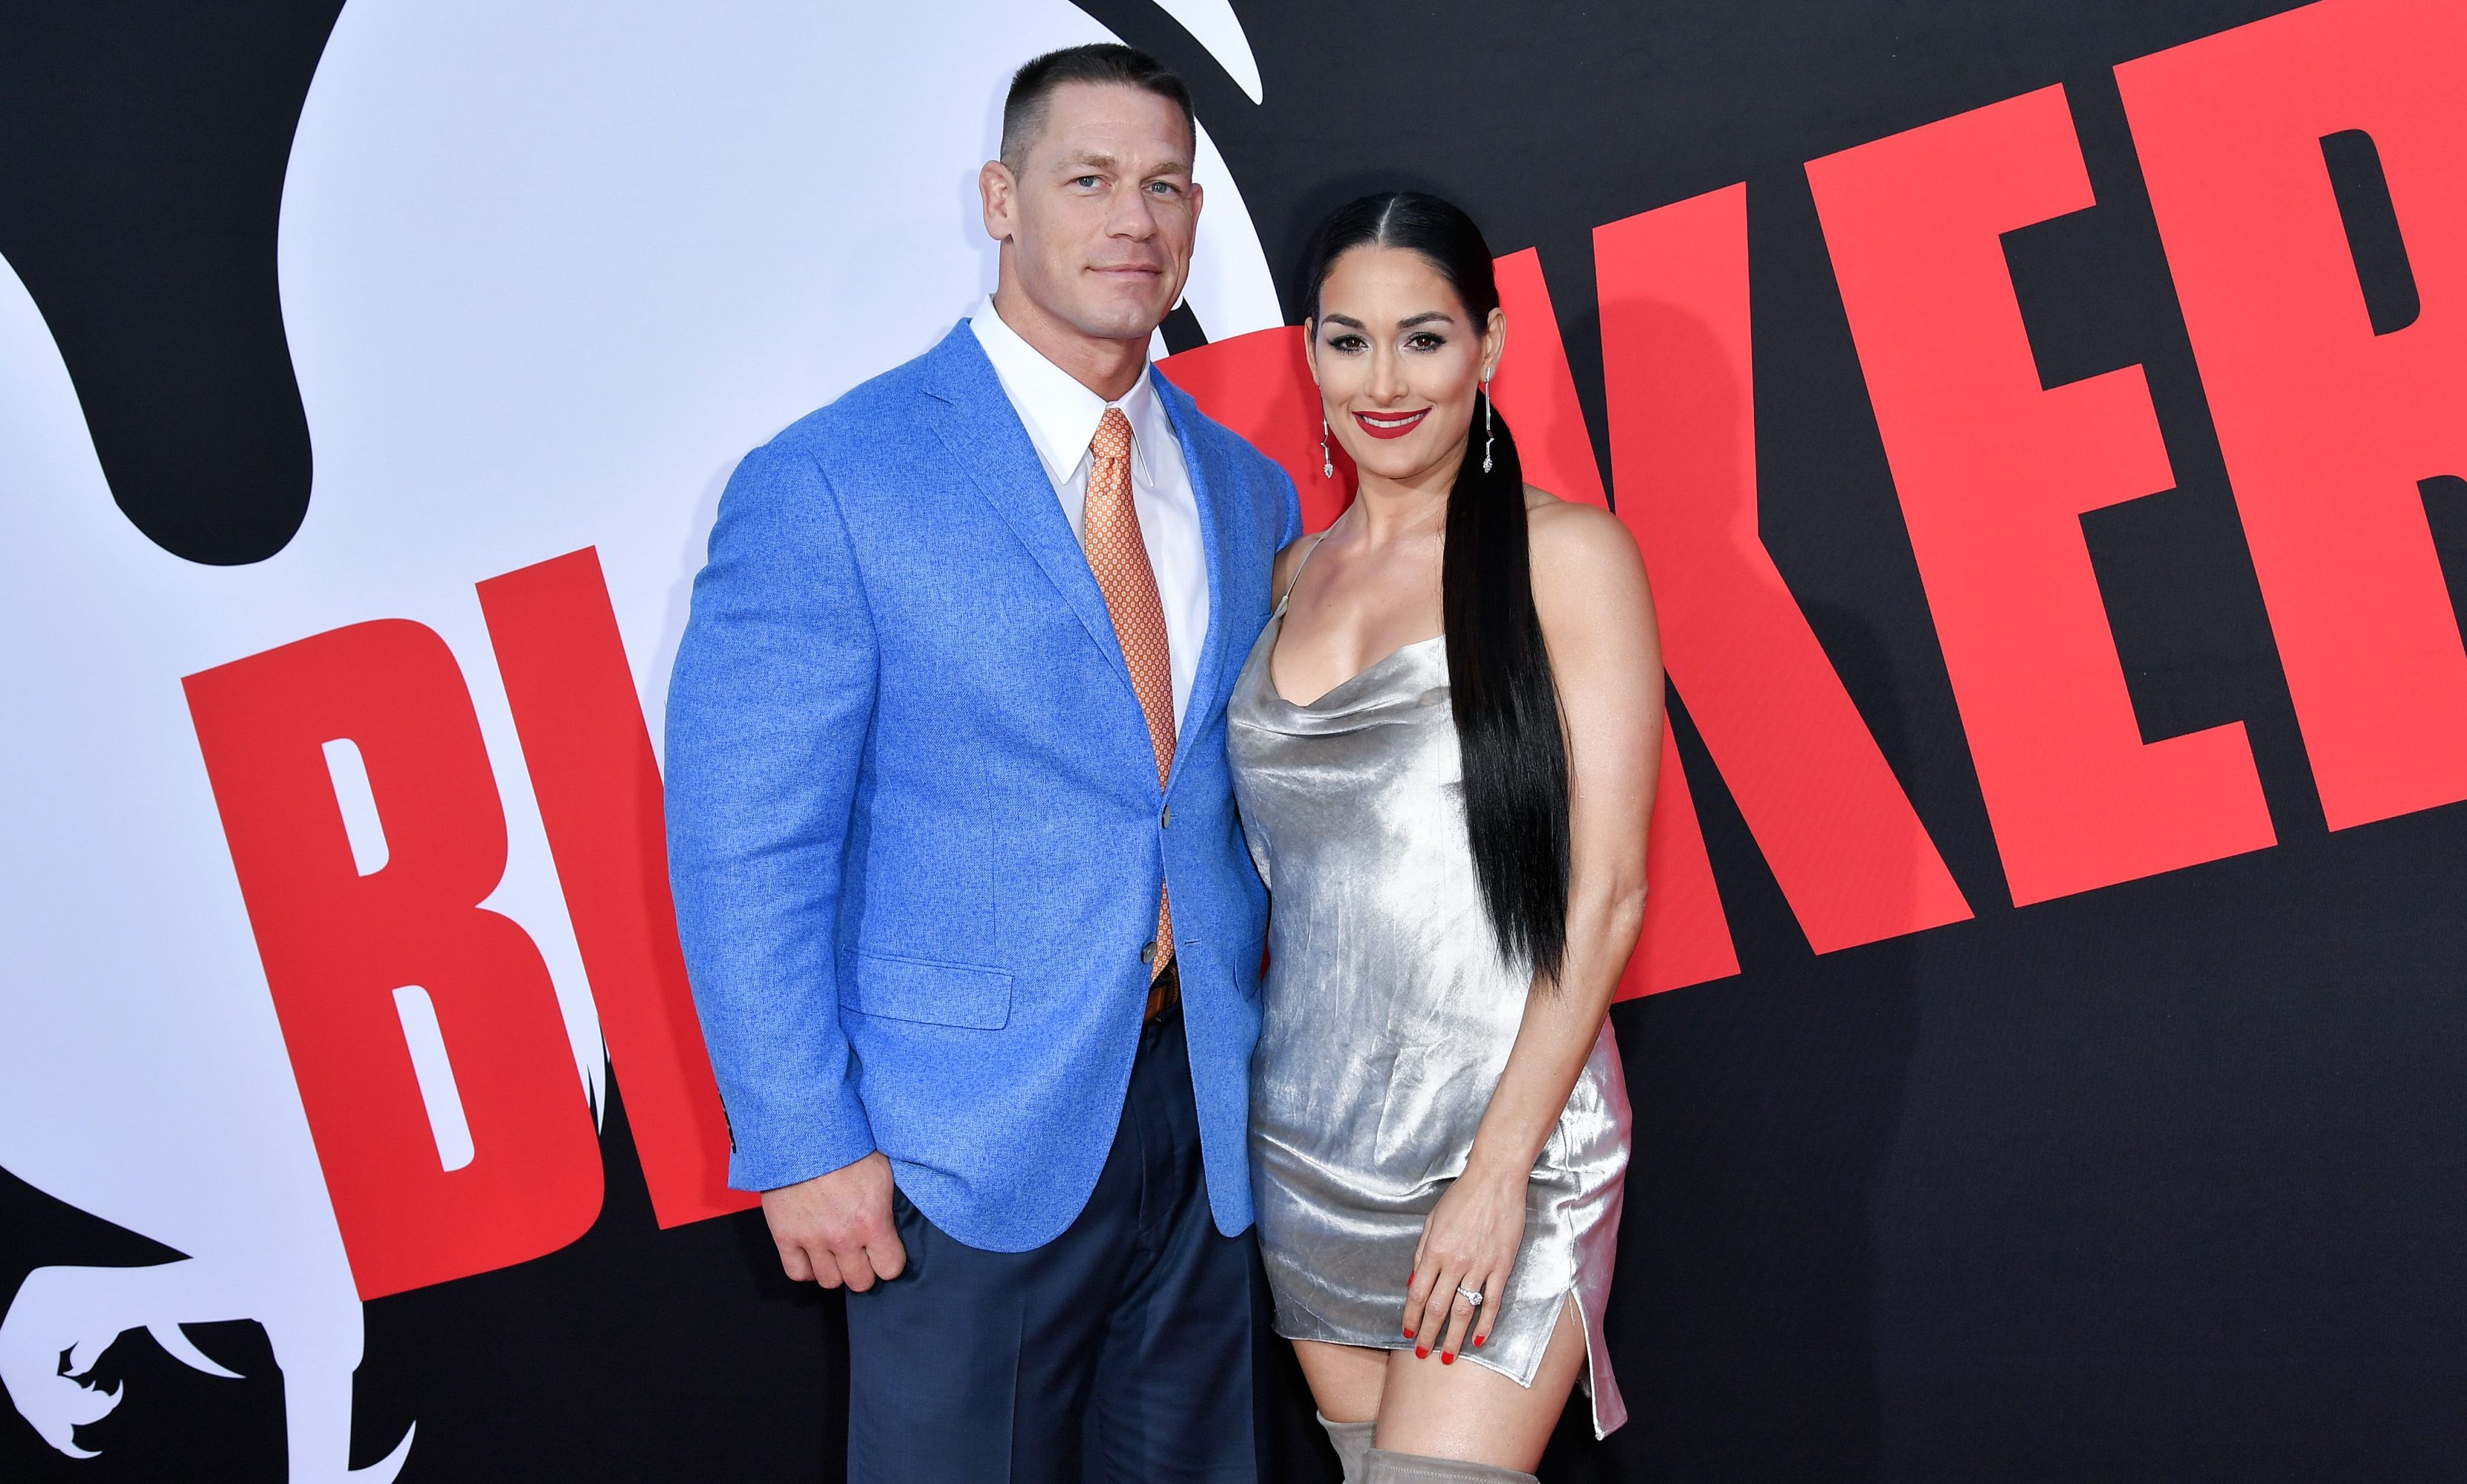 Nikki Bella defends recycling dress she bought to marry ex John